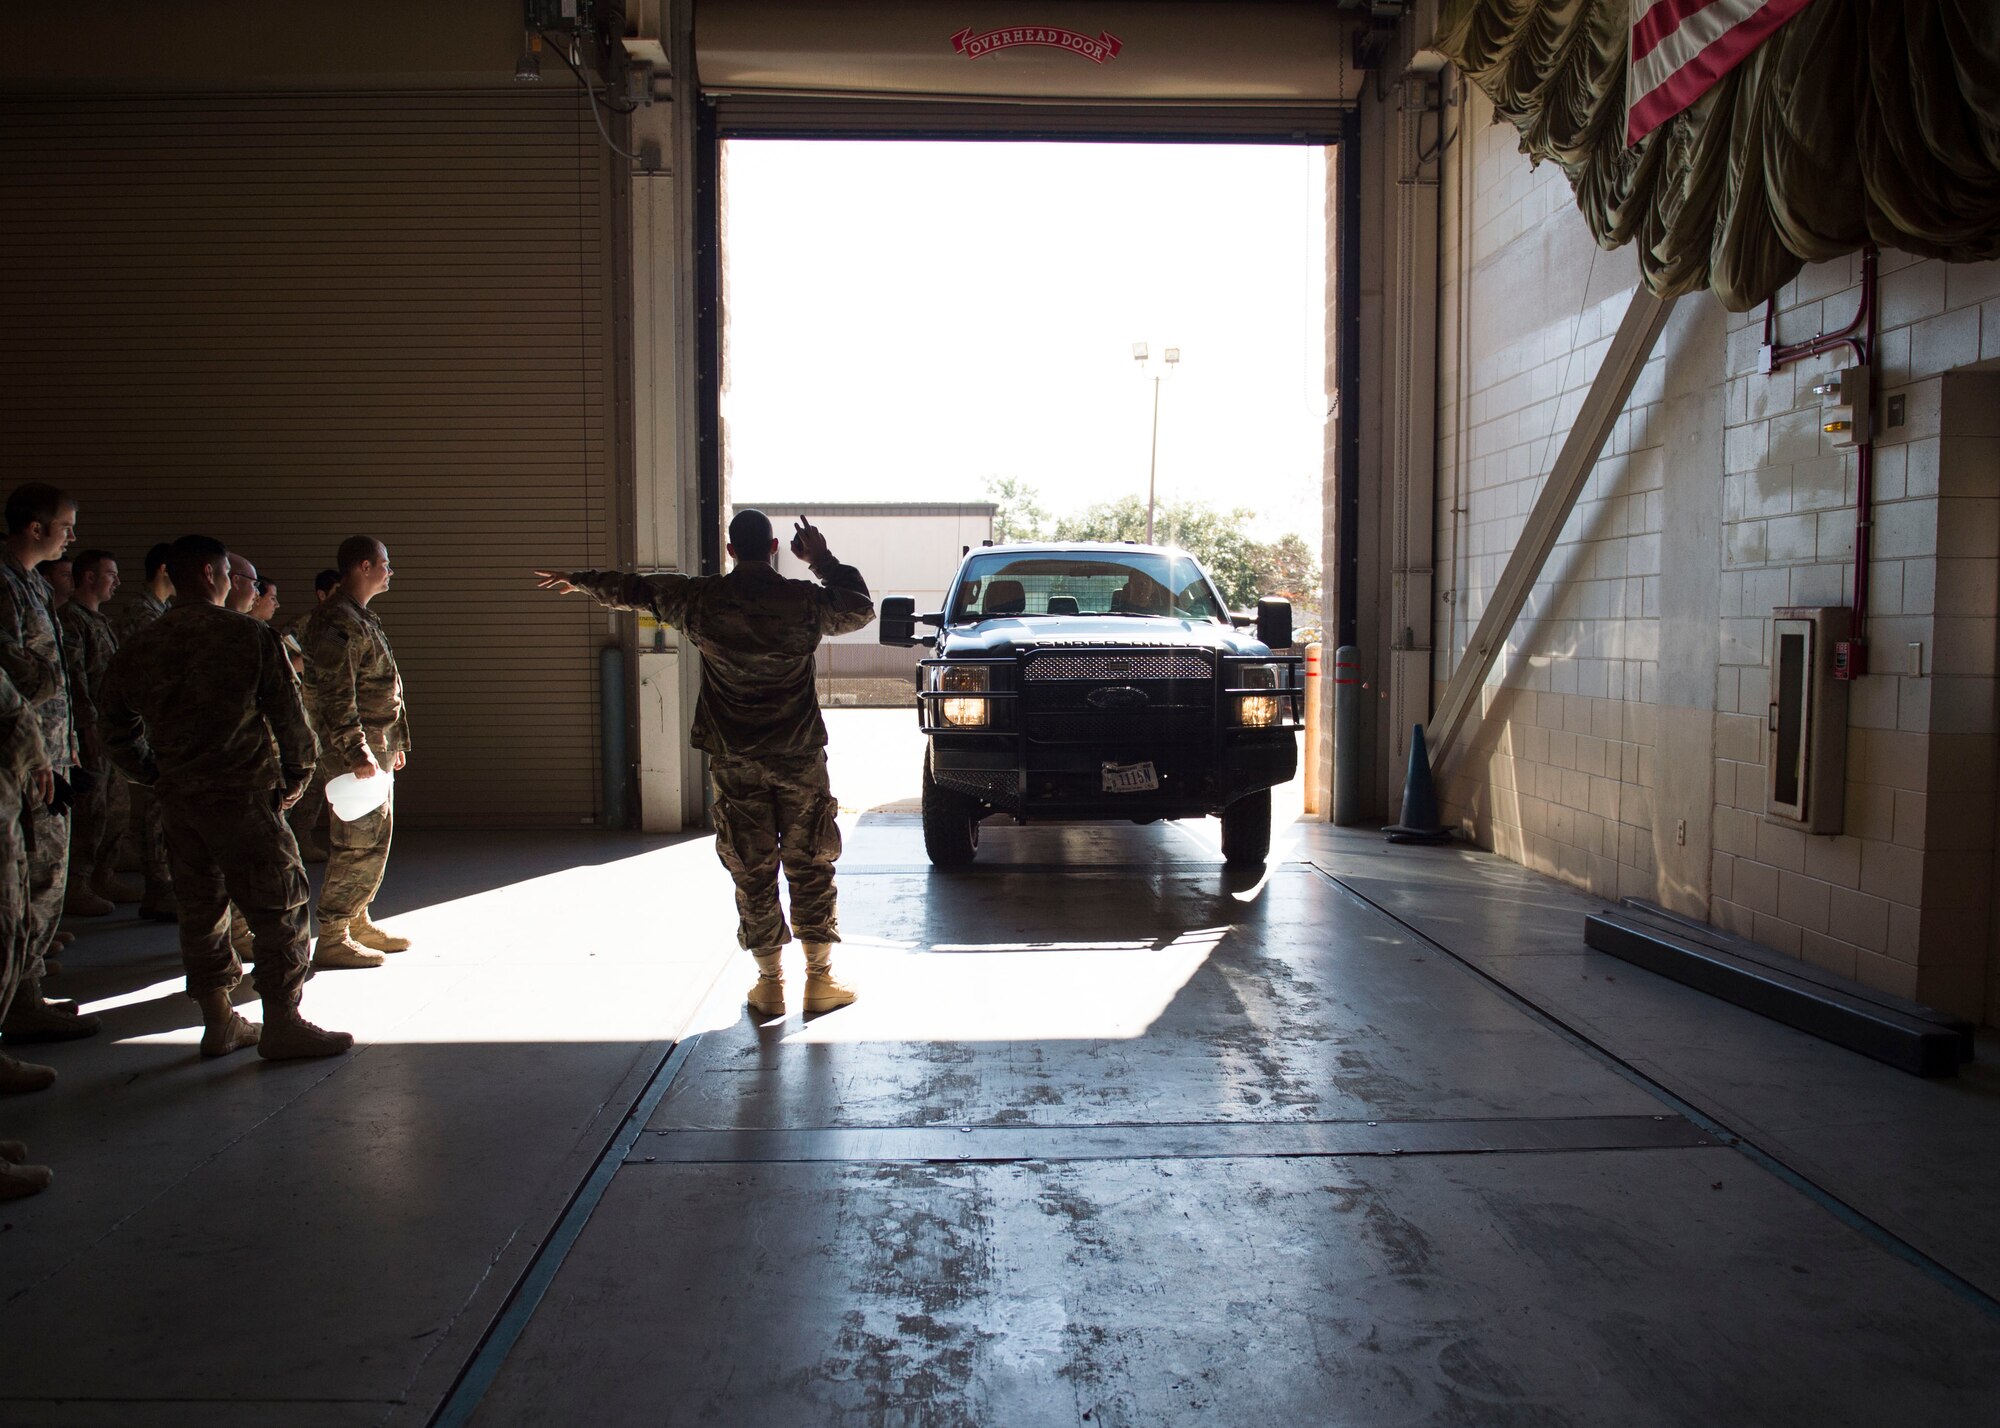 Staff Sgt. Brendon Walsh, an air terminal and aerial delivery craftsman with the 1st Special Operations Logistic Readiness Squadron, marshals a vehicle onto a scale during pallet build-up training at Hurlburt Field, Fla., Dec. 12, 2016. AFE Air Commandos were trained to properly weigh and document vehicles for cargo loading. The training ensures Air Commandos are ready to execute global special operations. (U.S. Air Force photo by Senior Airman Krystal M. Garrett)